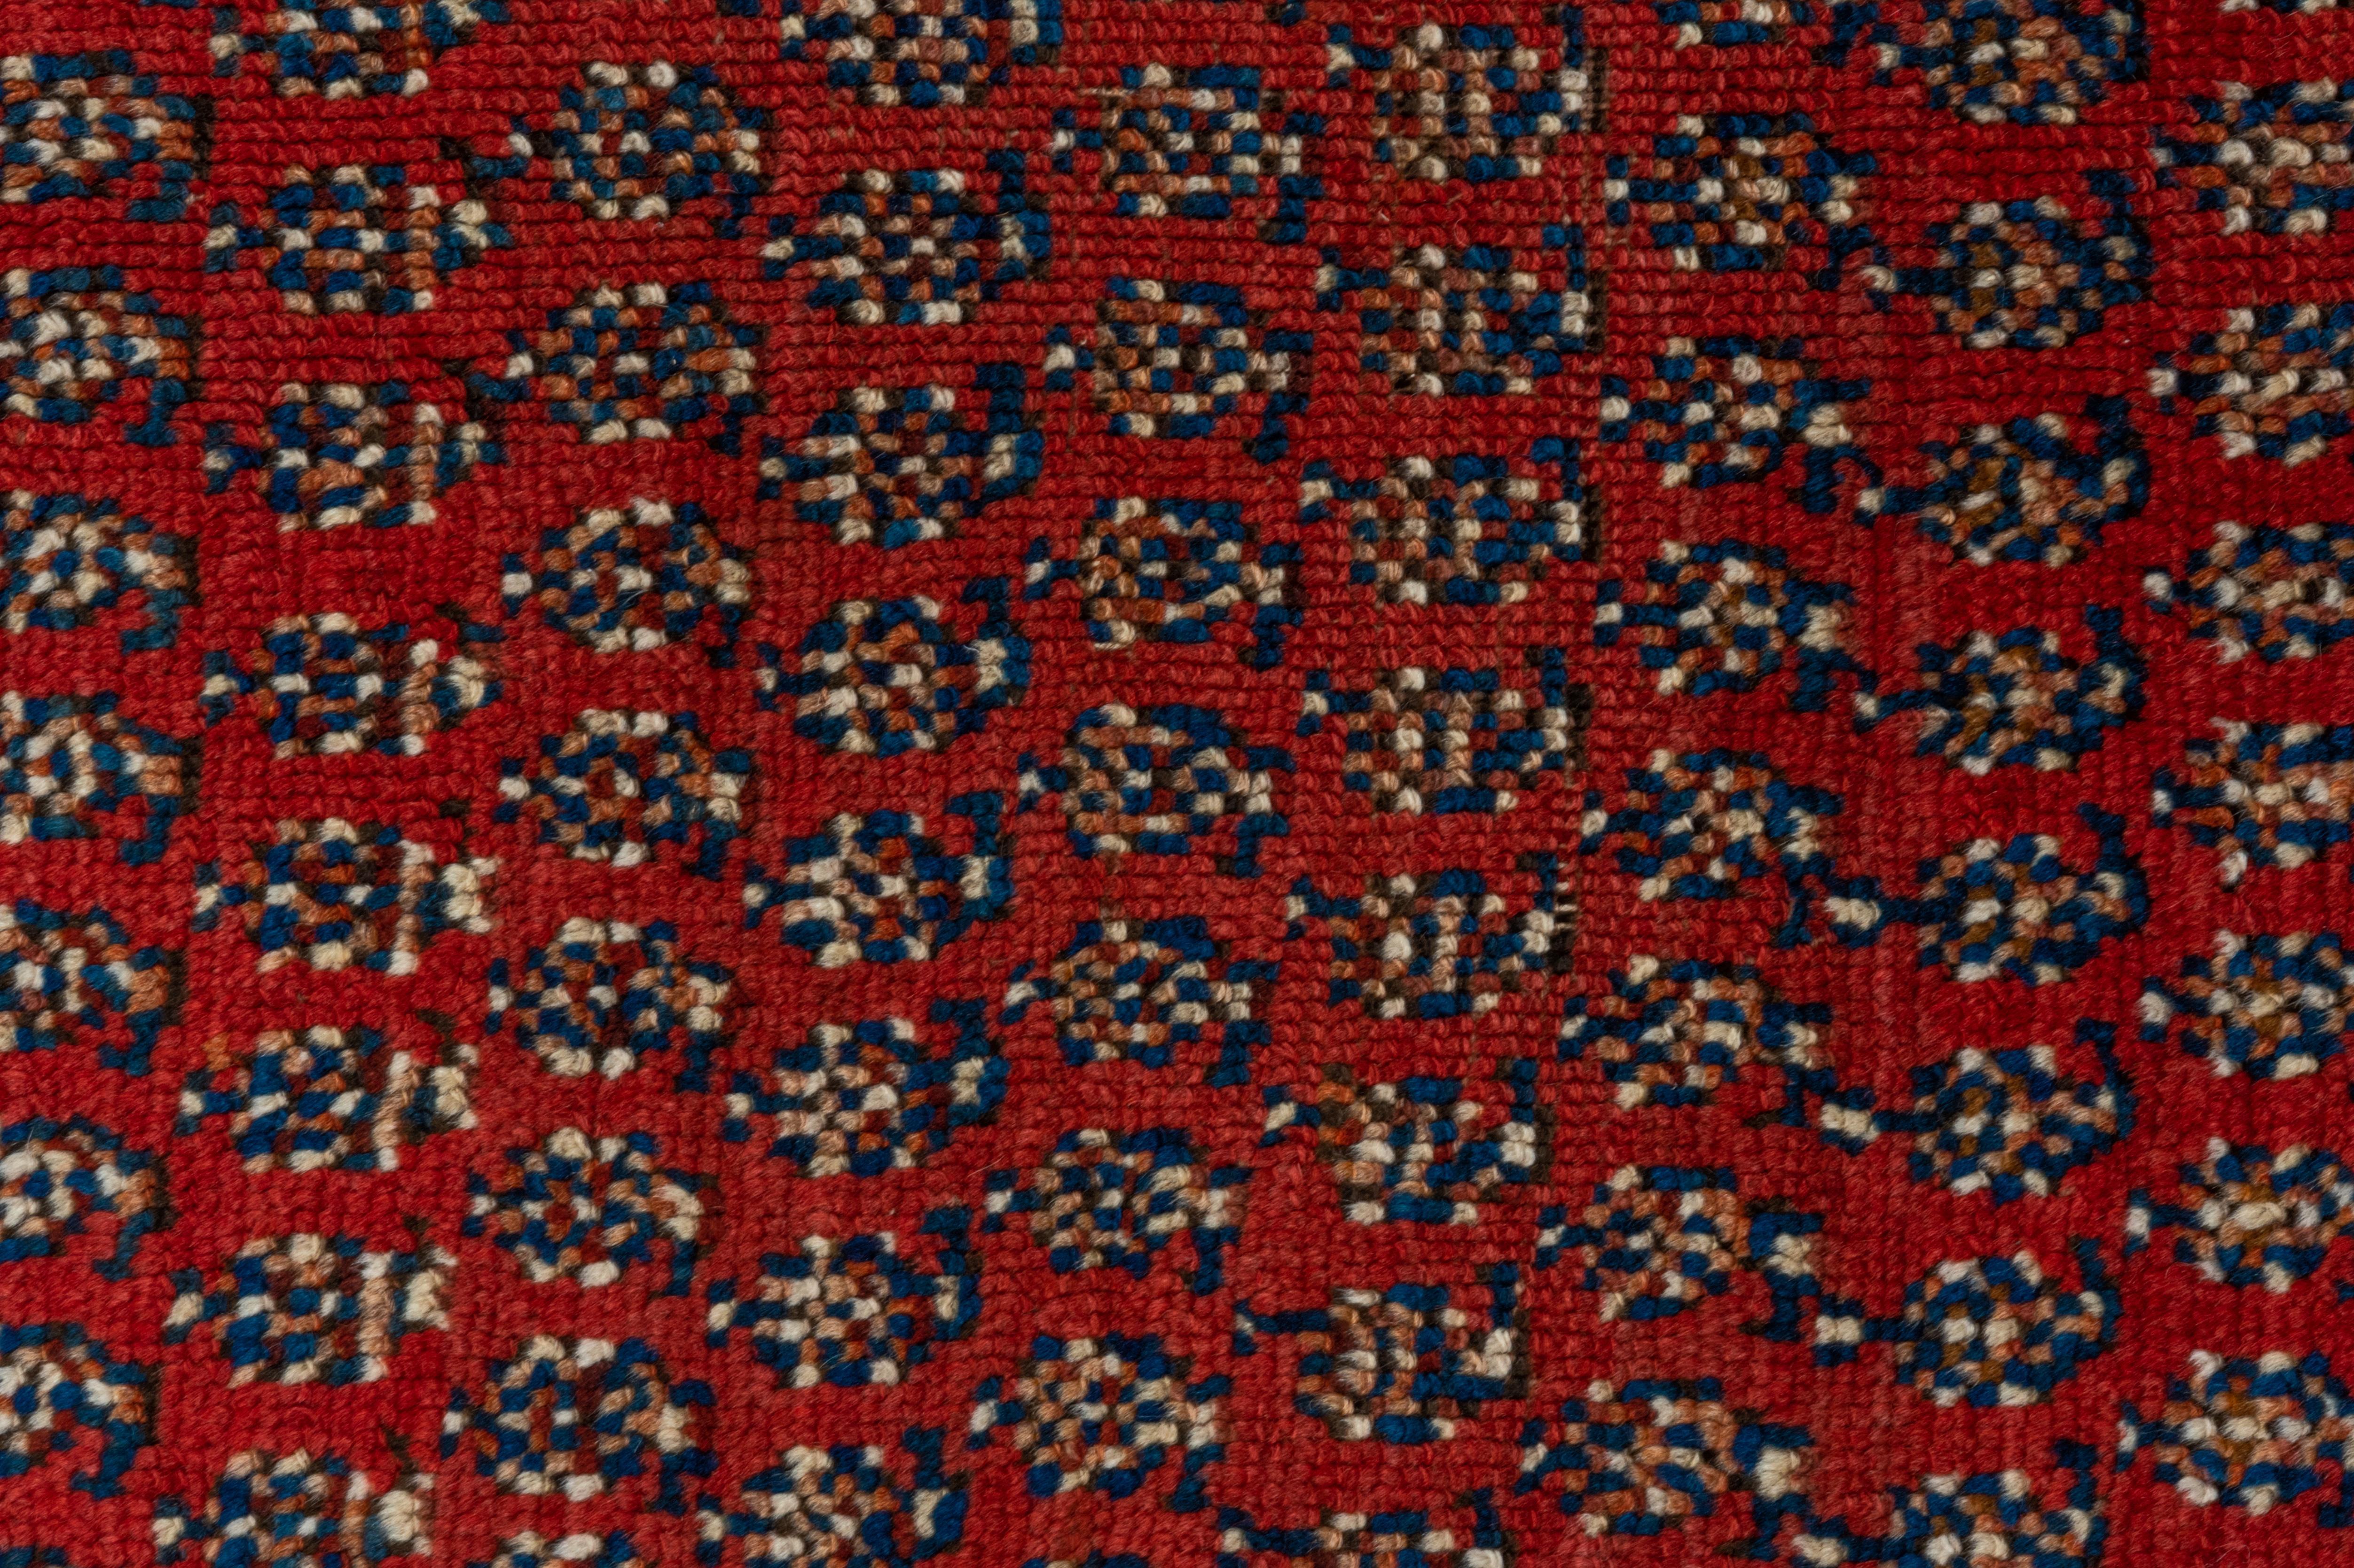 Wool Antique Northwest Persian Runner, Red Paisley Field, High Pile with Fringes